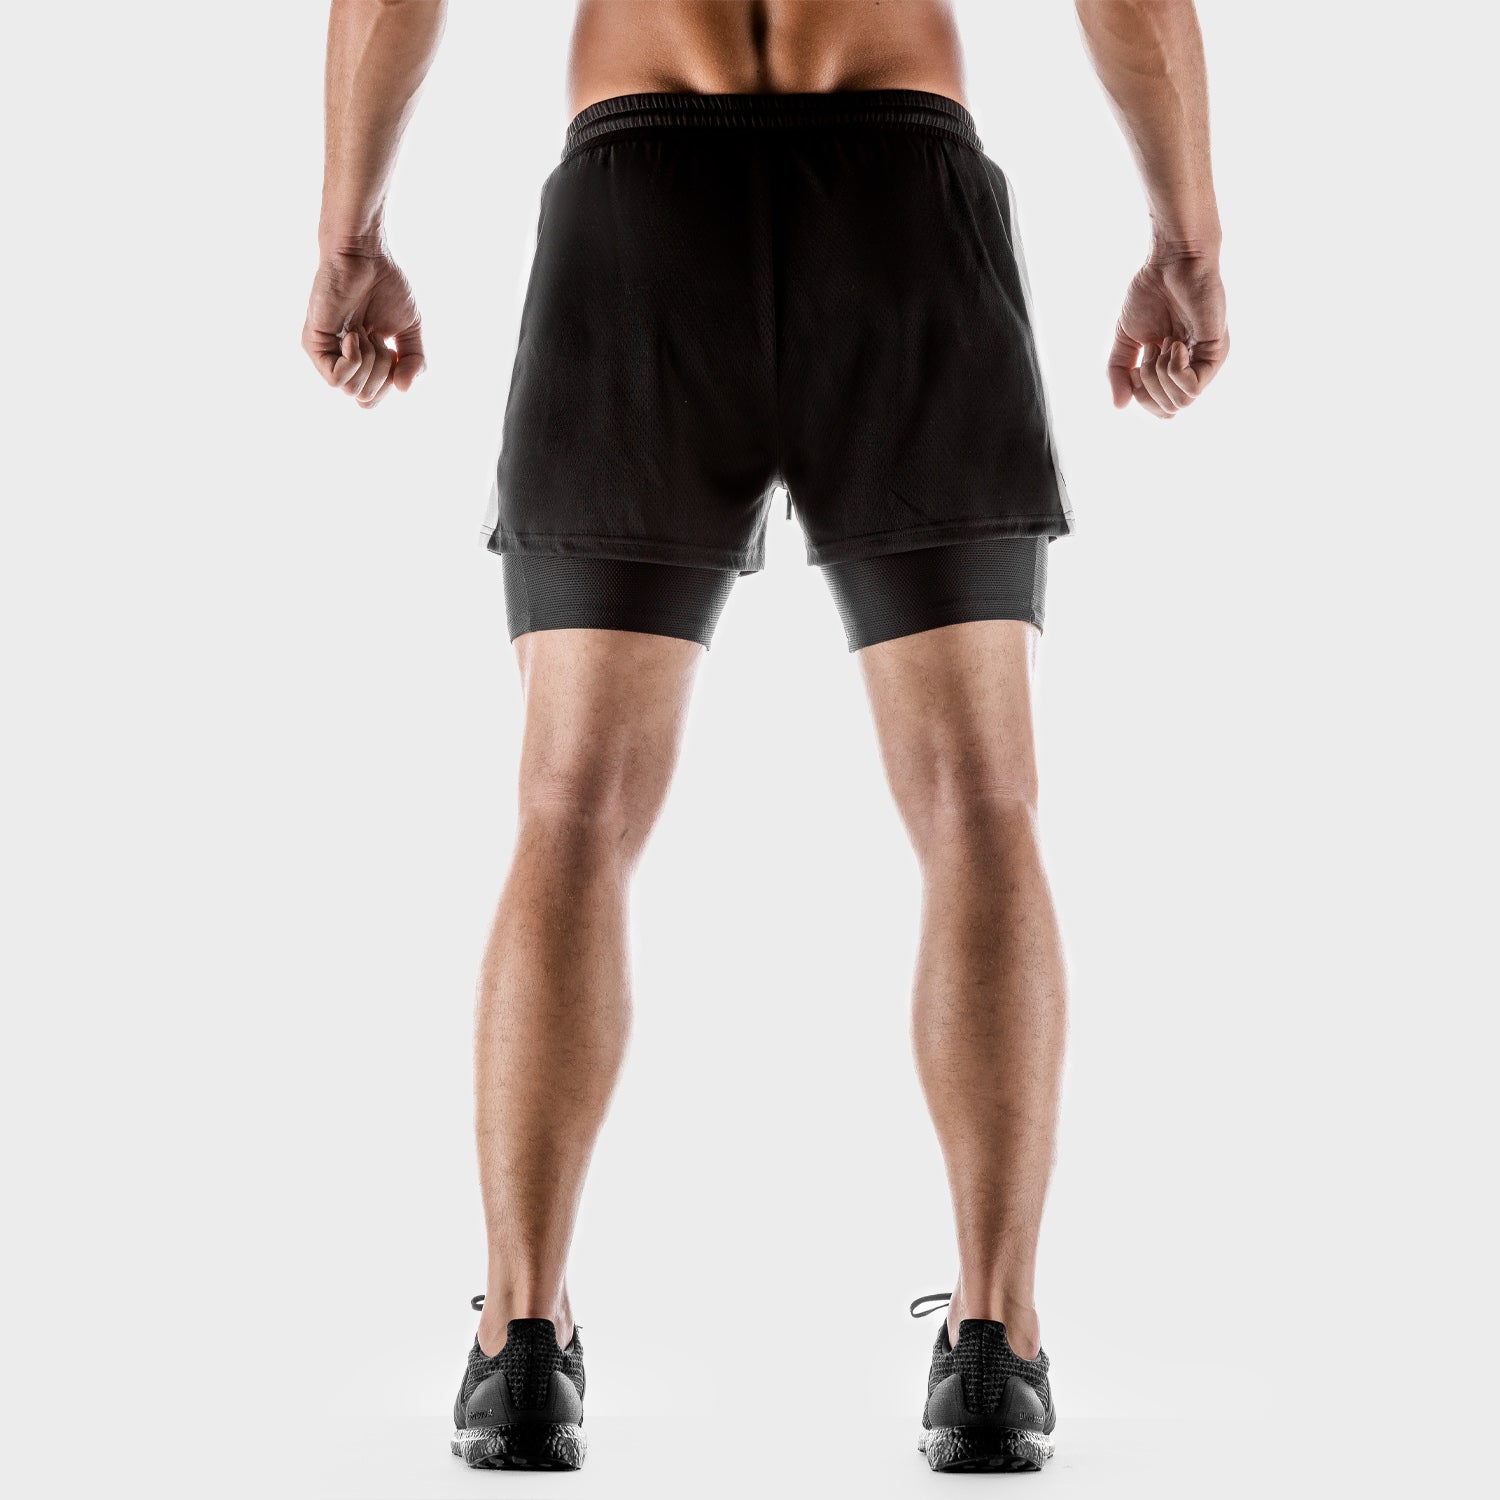 squatwolf-gym-wear-hybrid-performance-2-in-1-shorts-black-workout-shorts-for-men